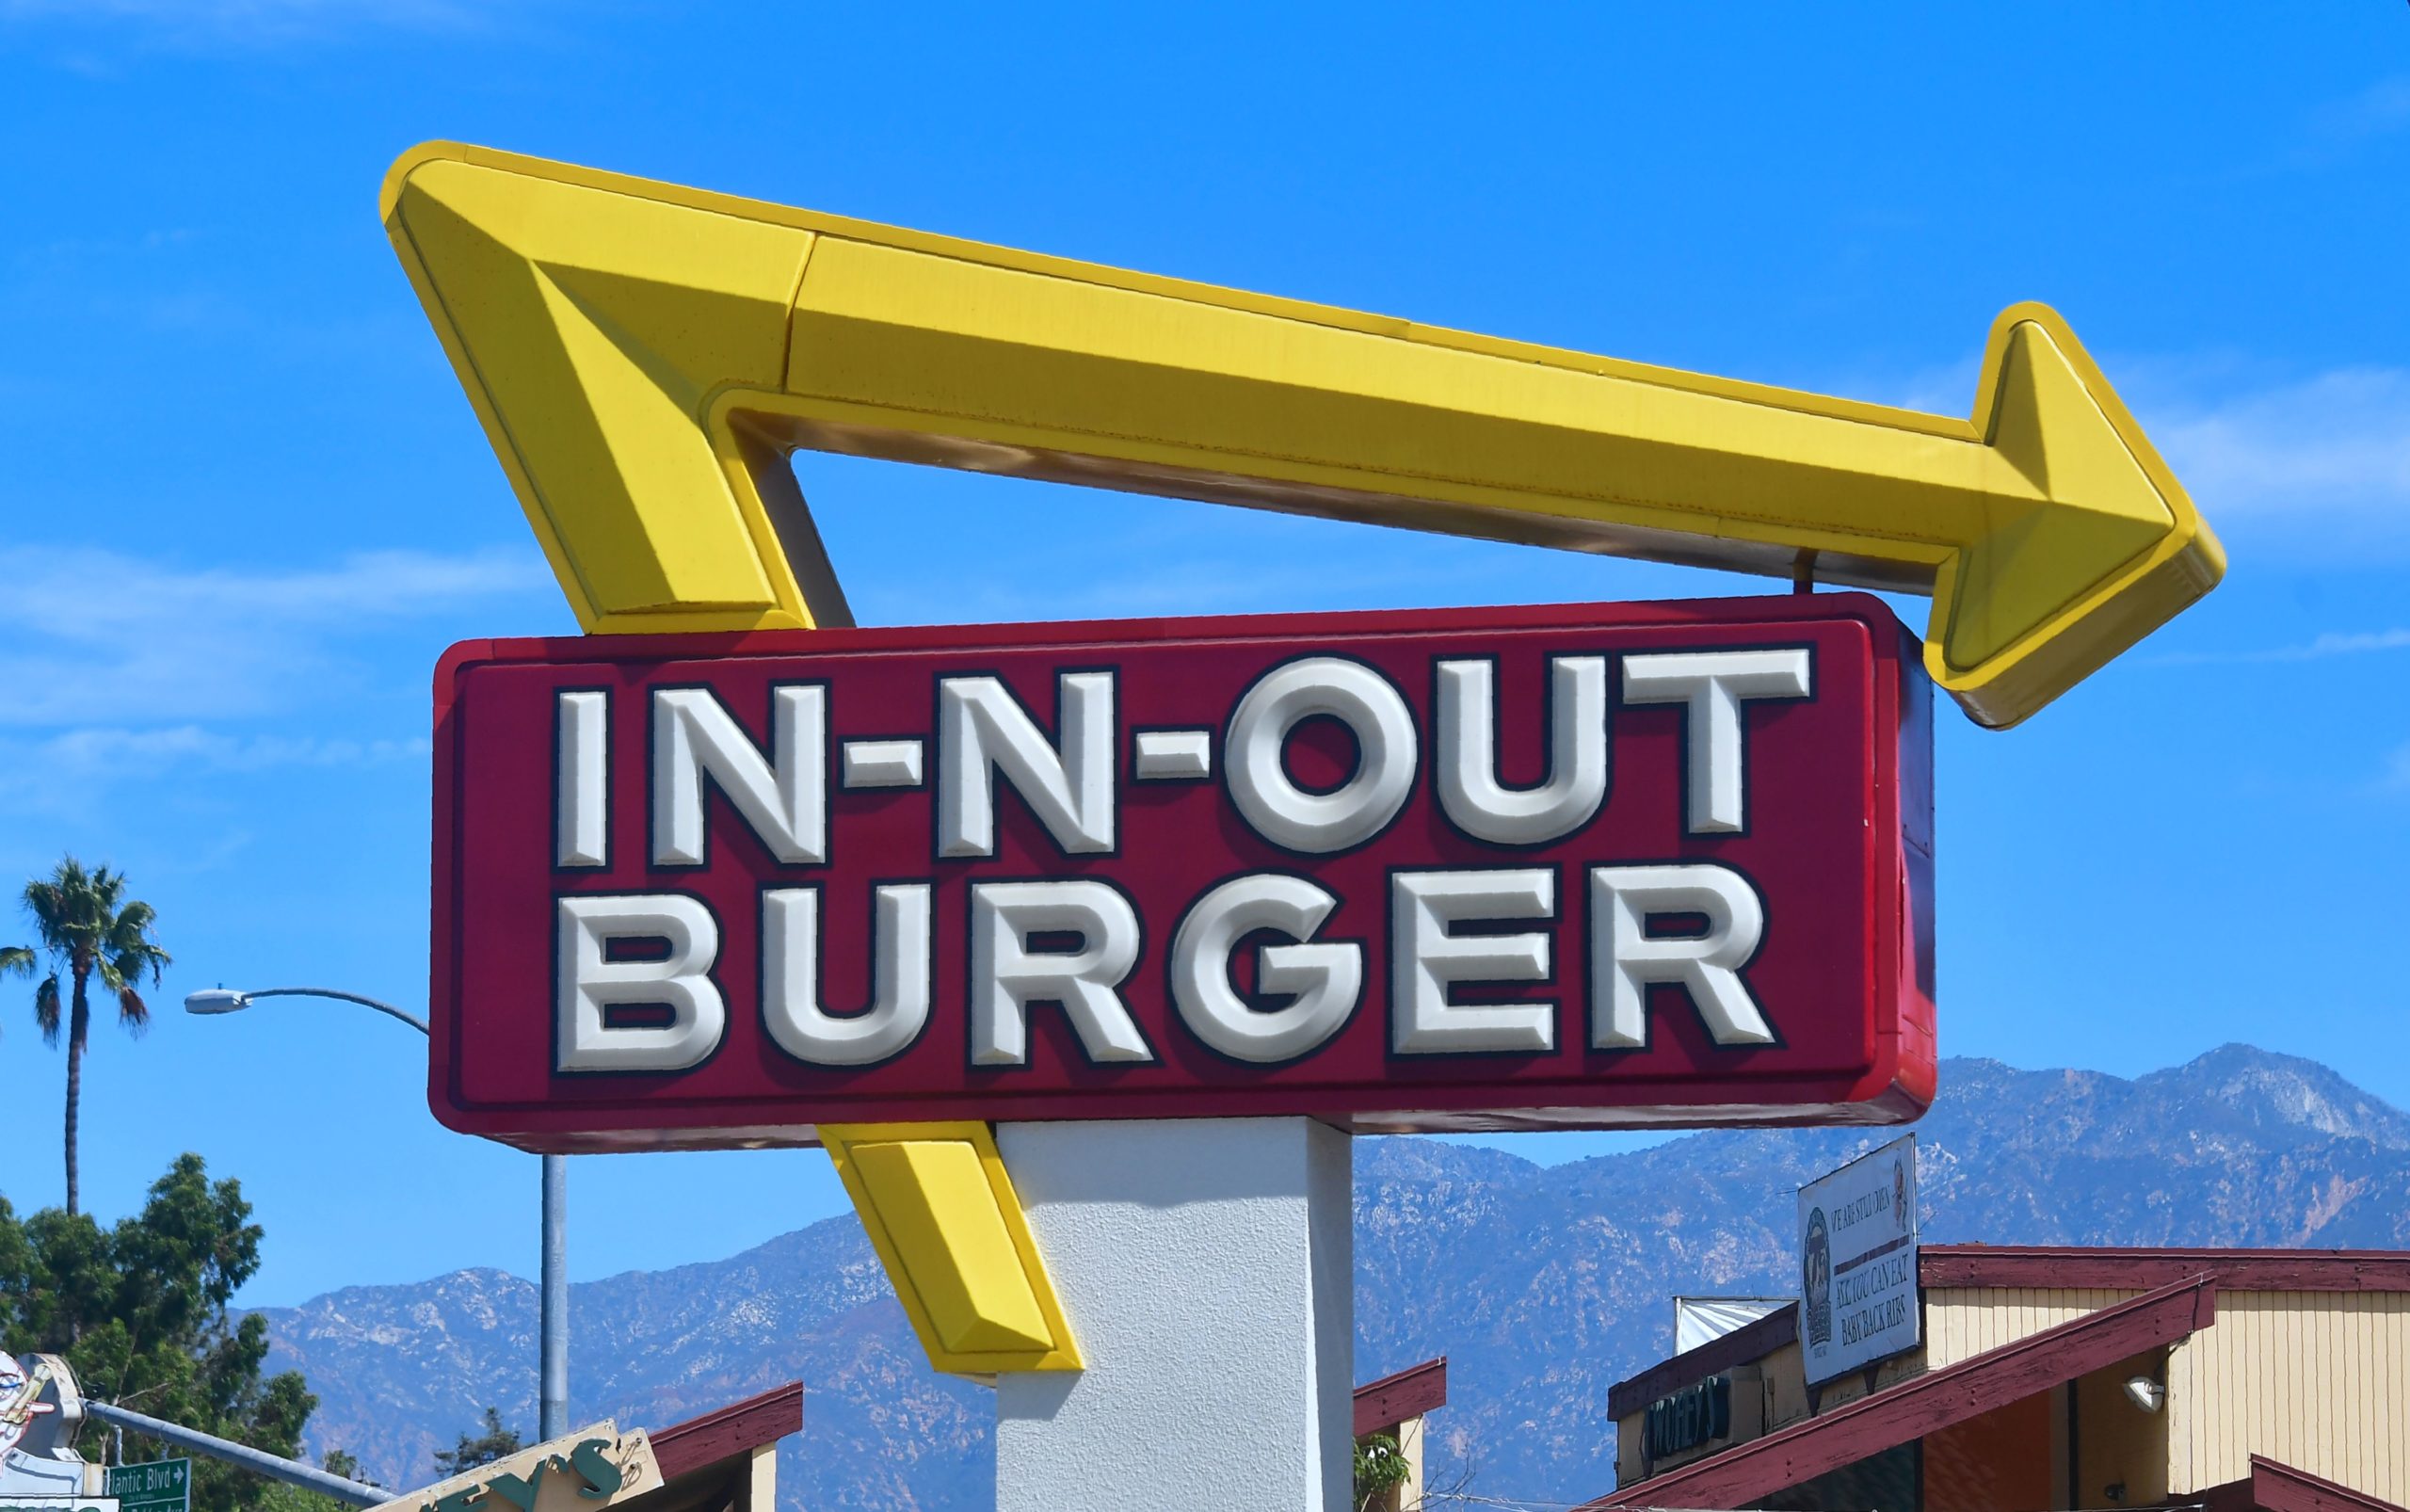 The sign points to an In-N-Out Burger restaurant in Alhambra, California (Photo by FREDERIC J. BROWN/AFP via Getty Images)